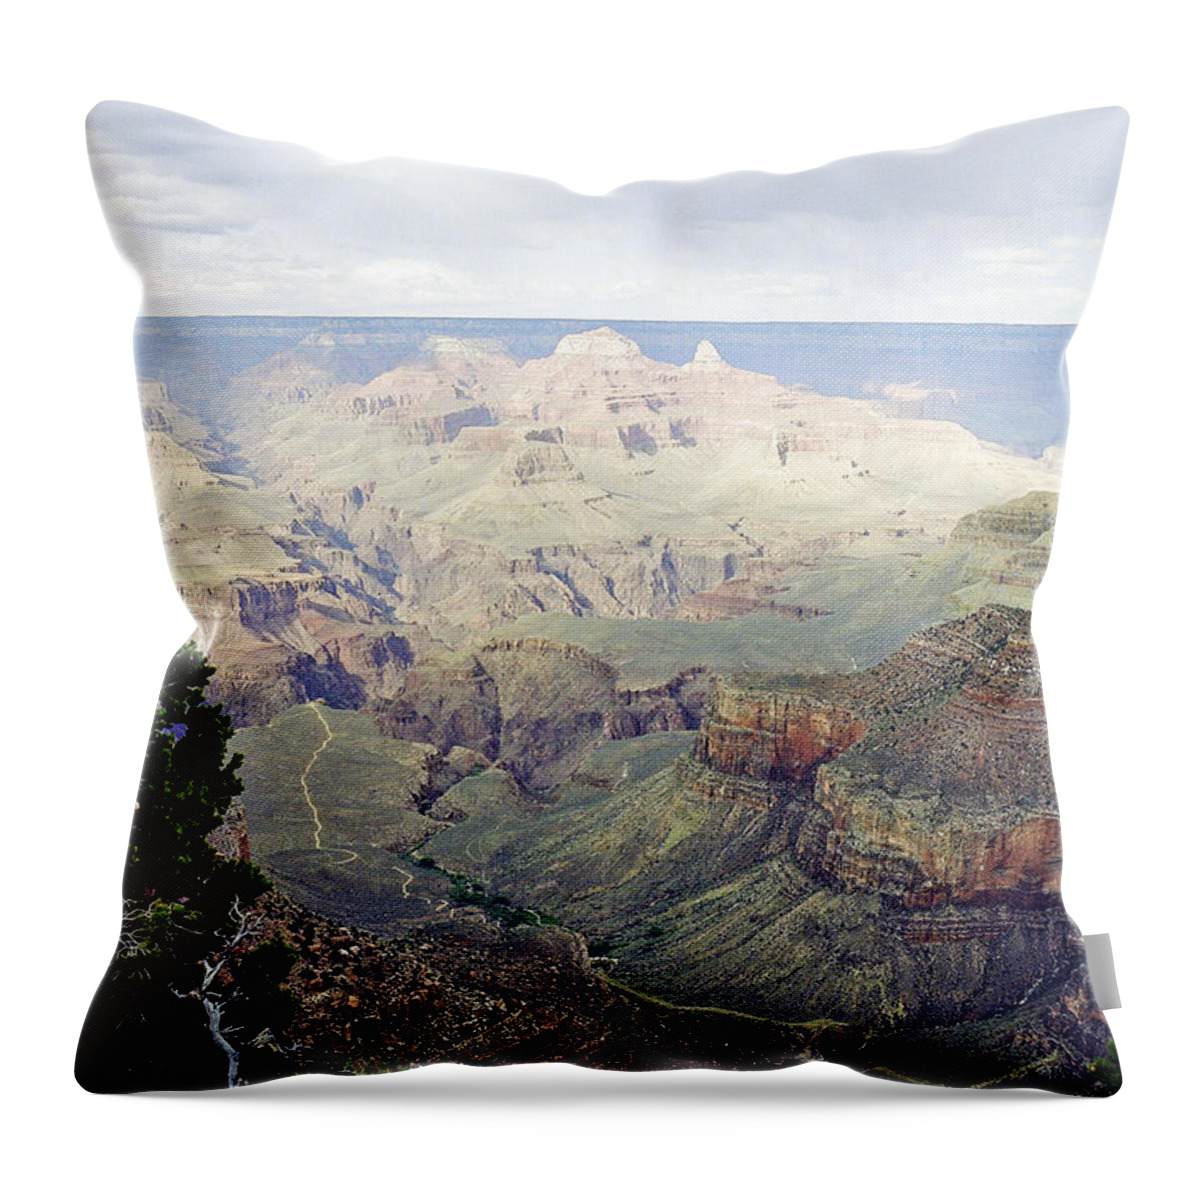 Grand Canyon Throw Pillow featuring the photograph Grand Canyon Arizona Fine Art Photograph In Color 3542.02 by M K Miller